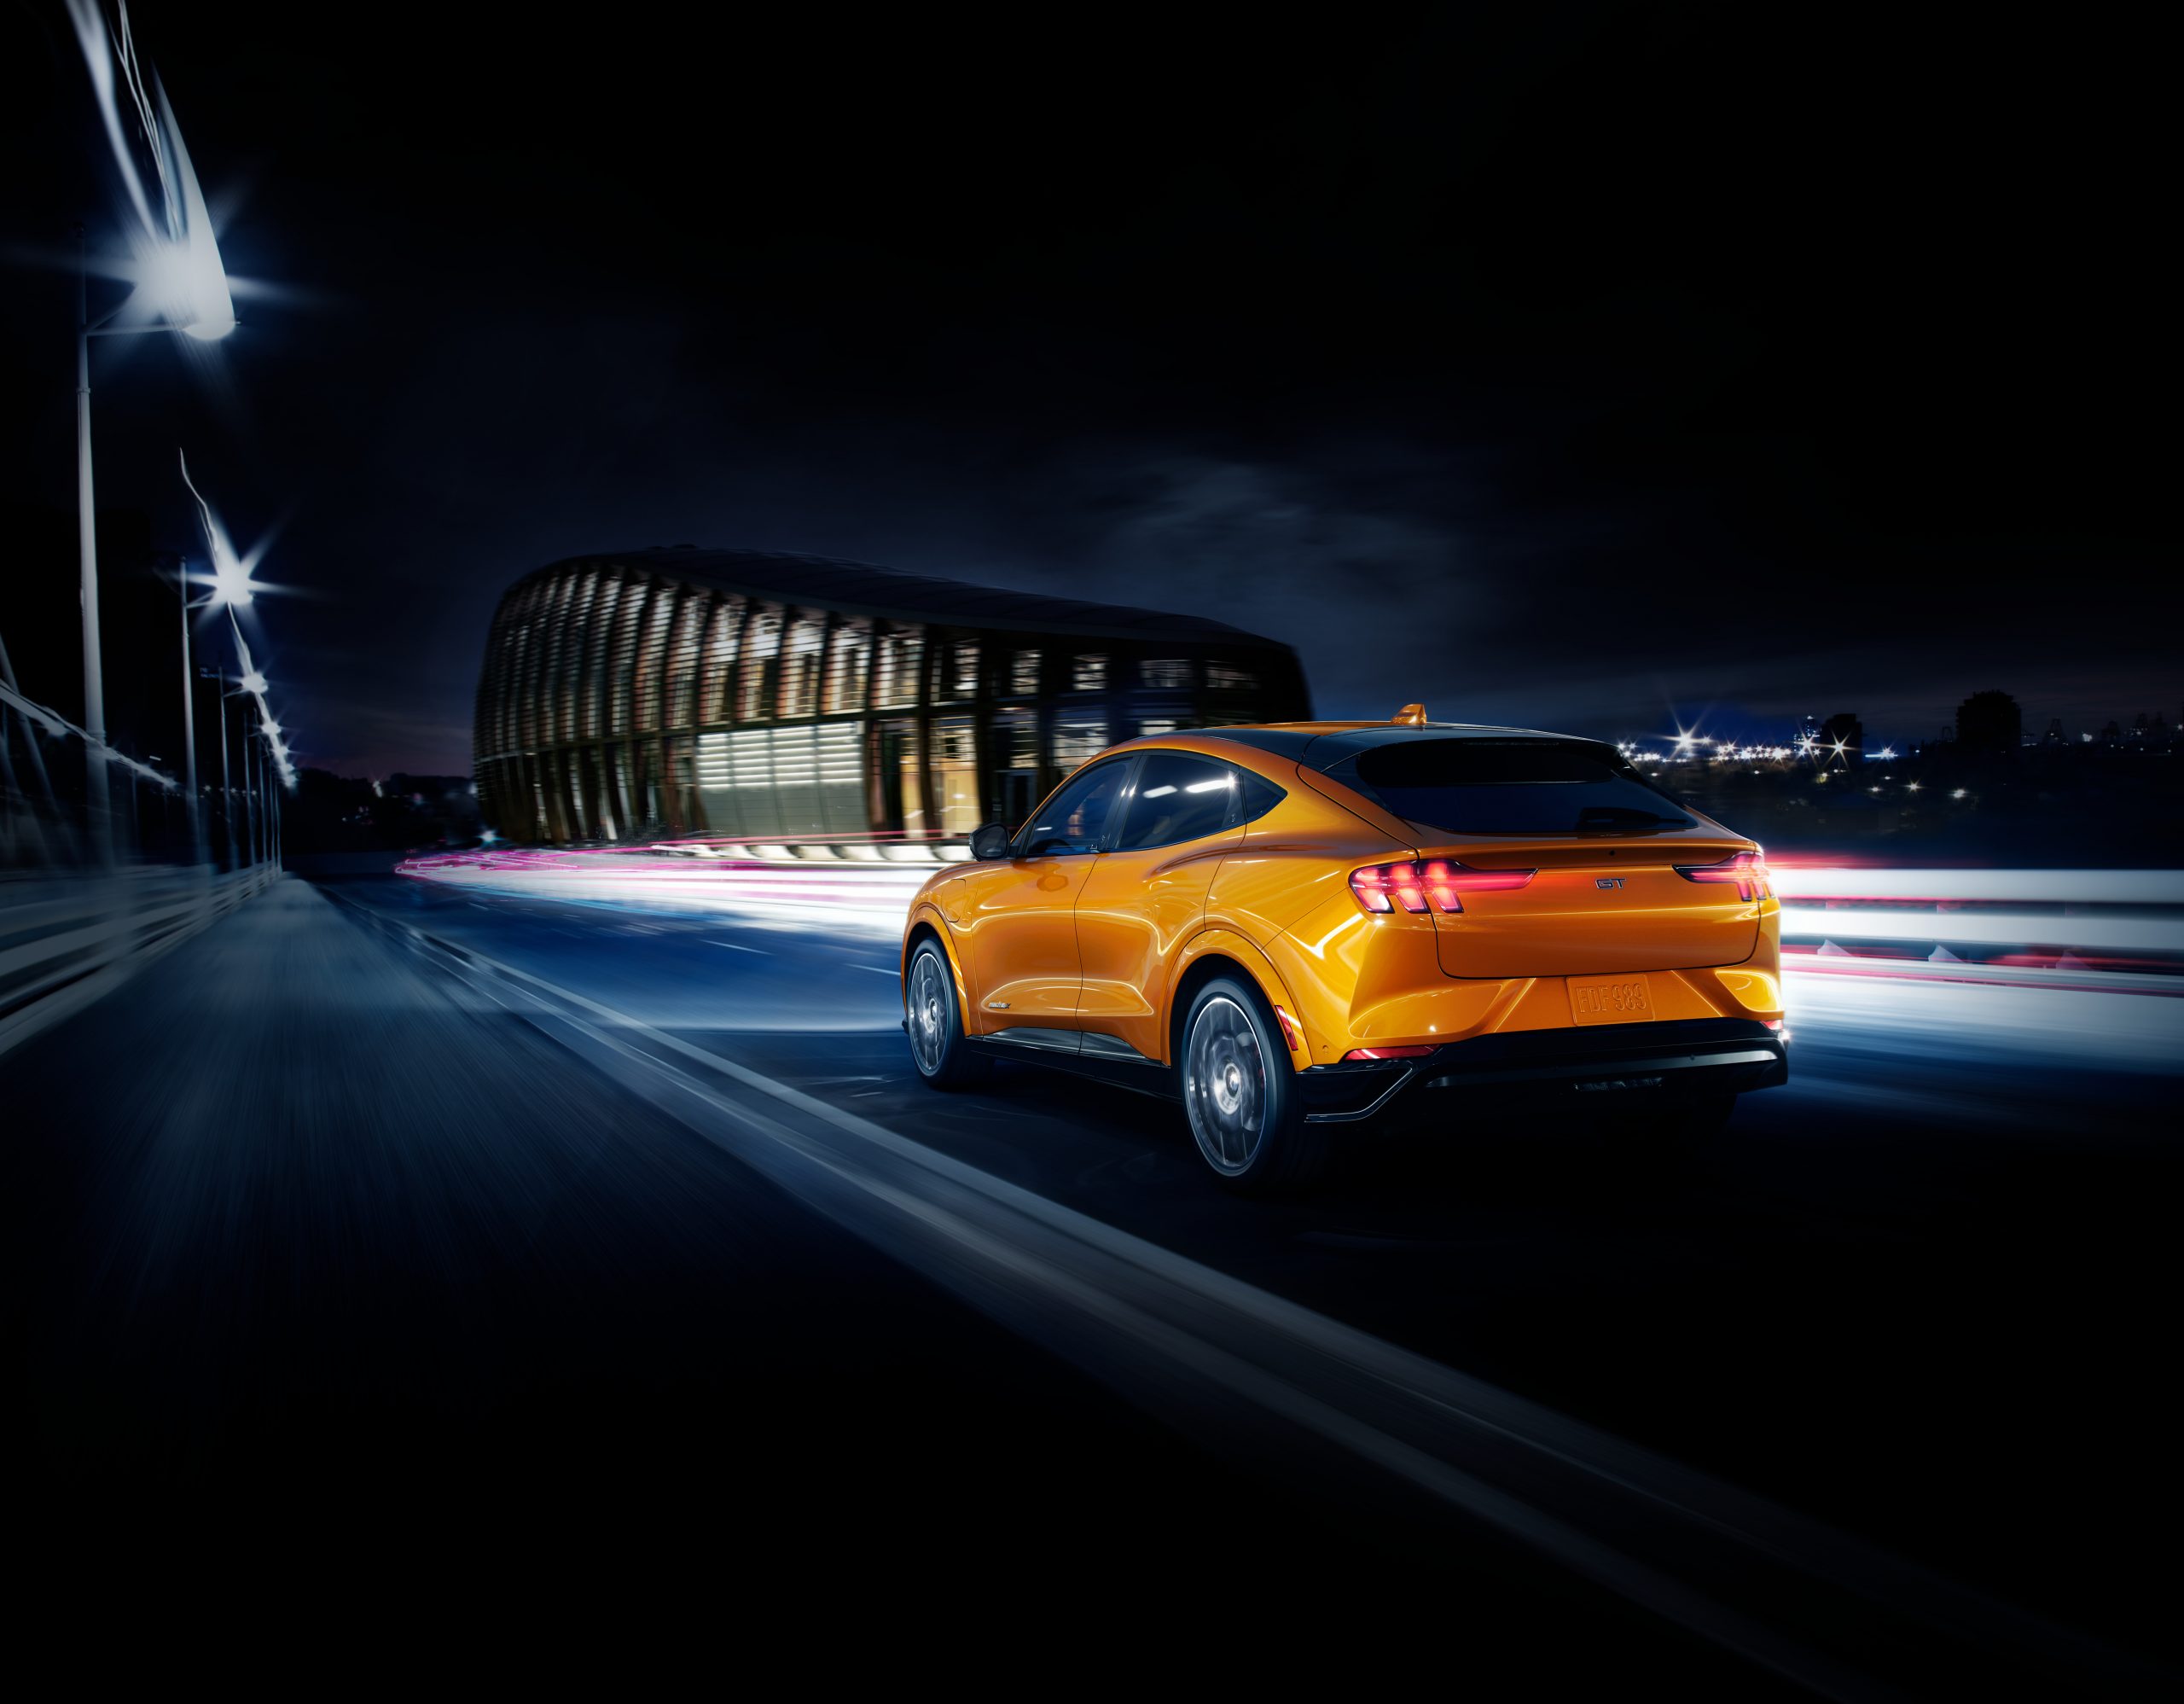 2020 FORD MACH E GT CYBER ORANGE 02 scaled Από 51.587 ευρώ η τιμή της Ford Mustang Mach-E στην Ελλάδα